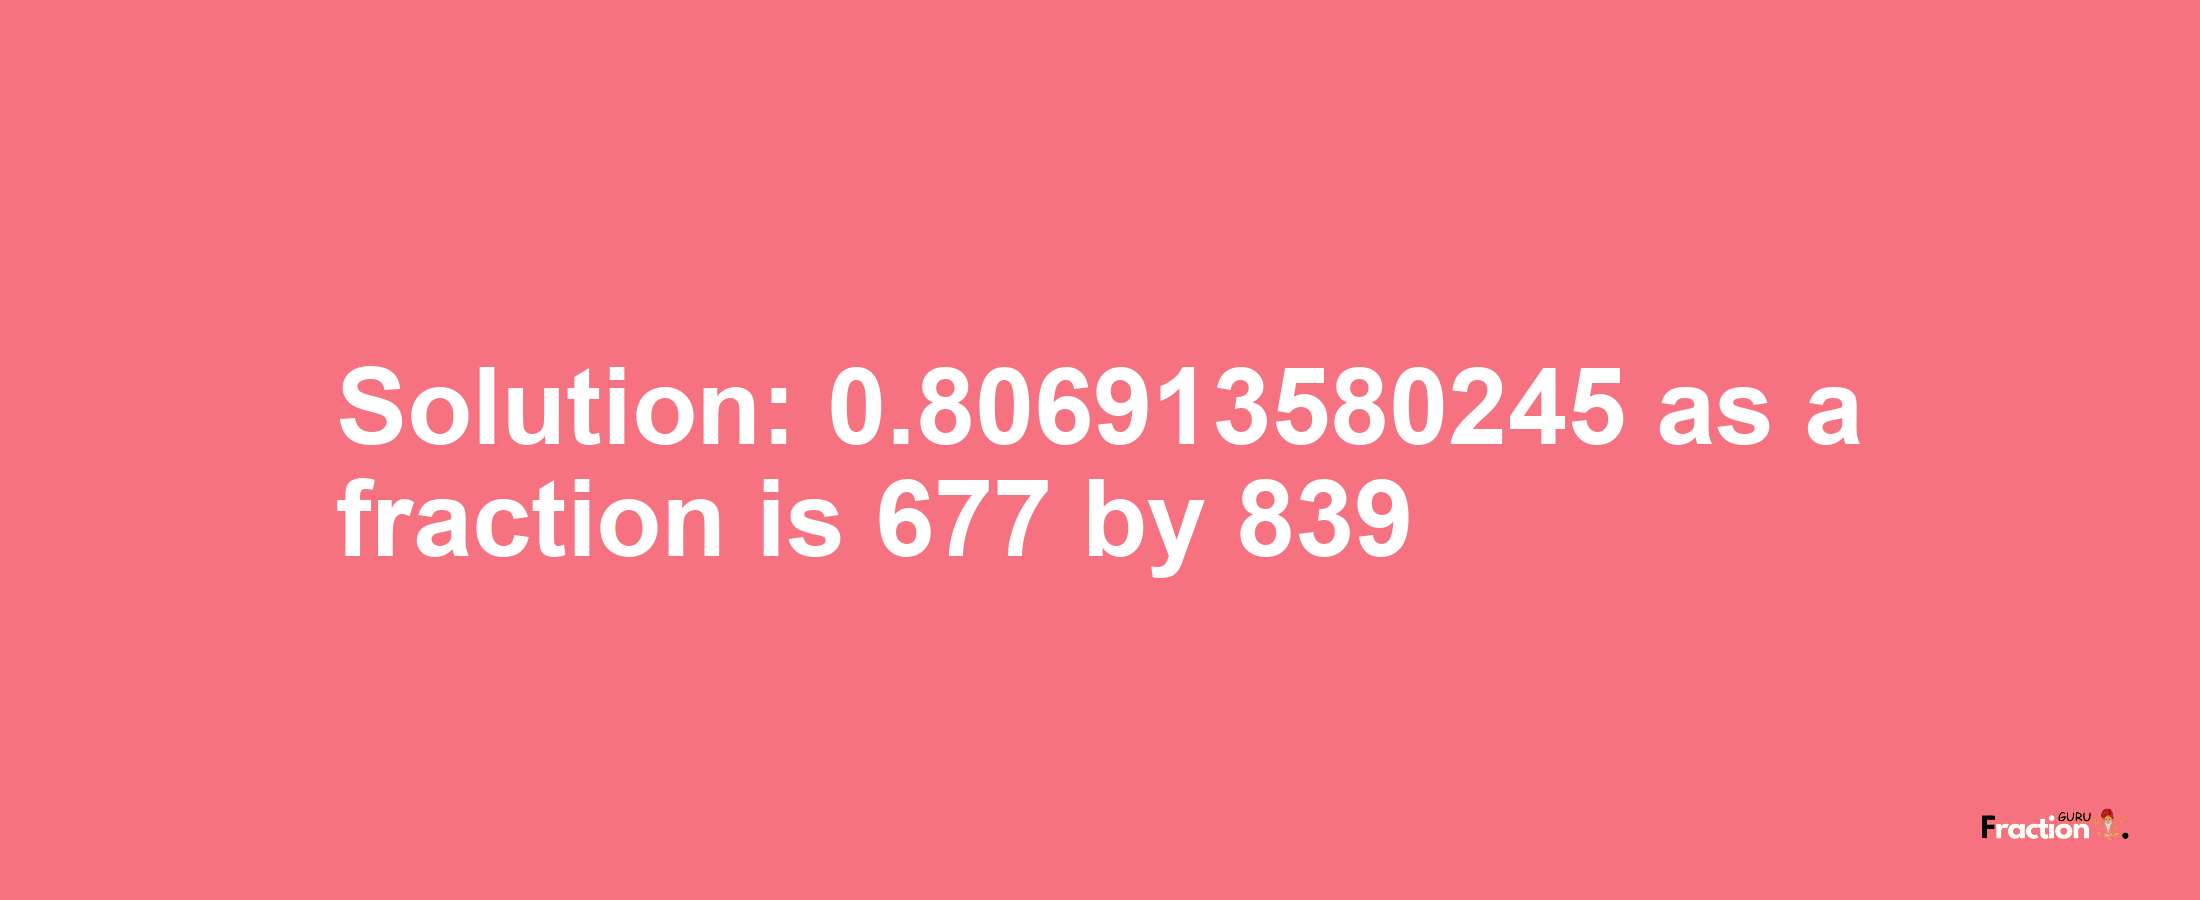 Solution:0.806913580245 as a fraction is 677/839